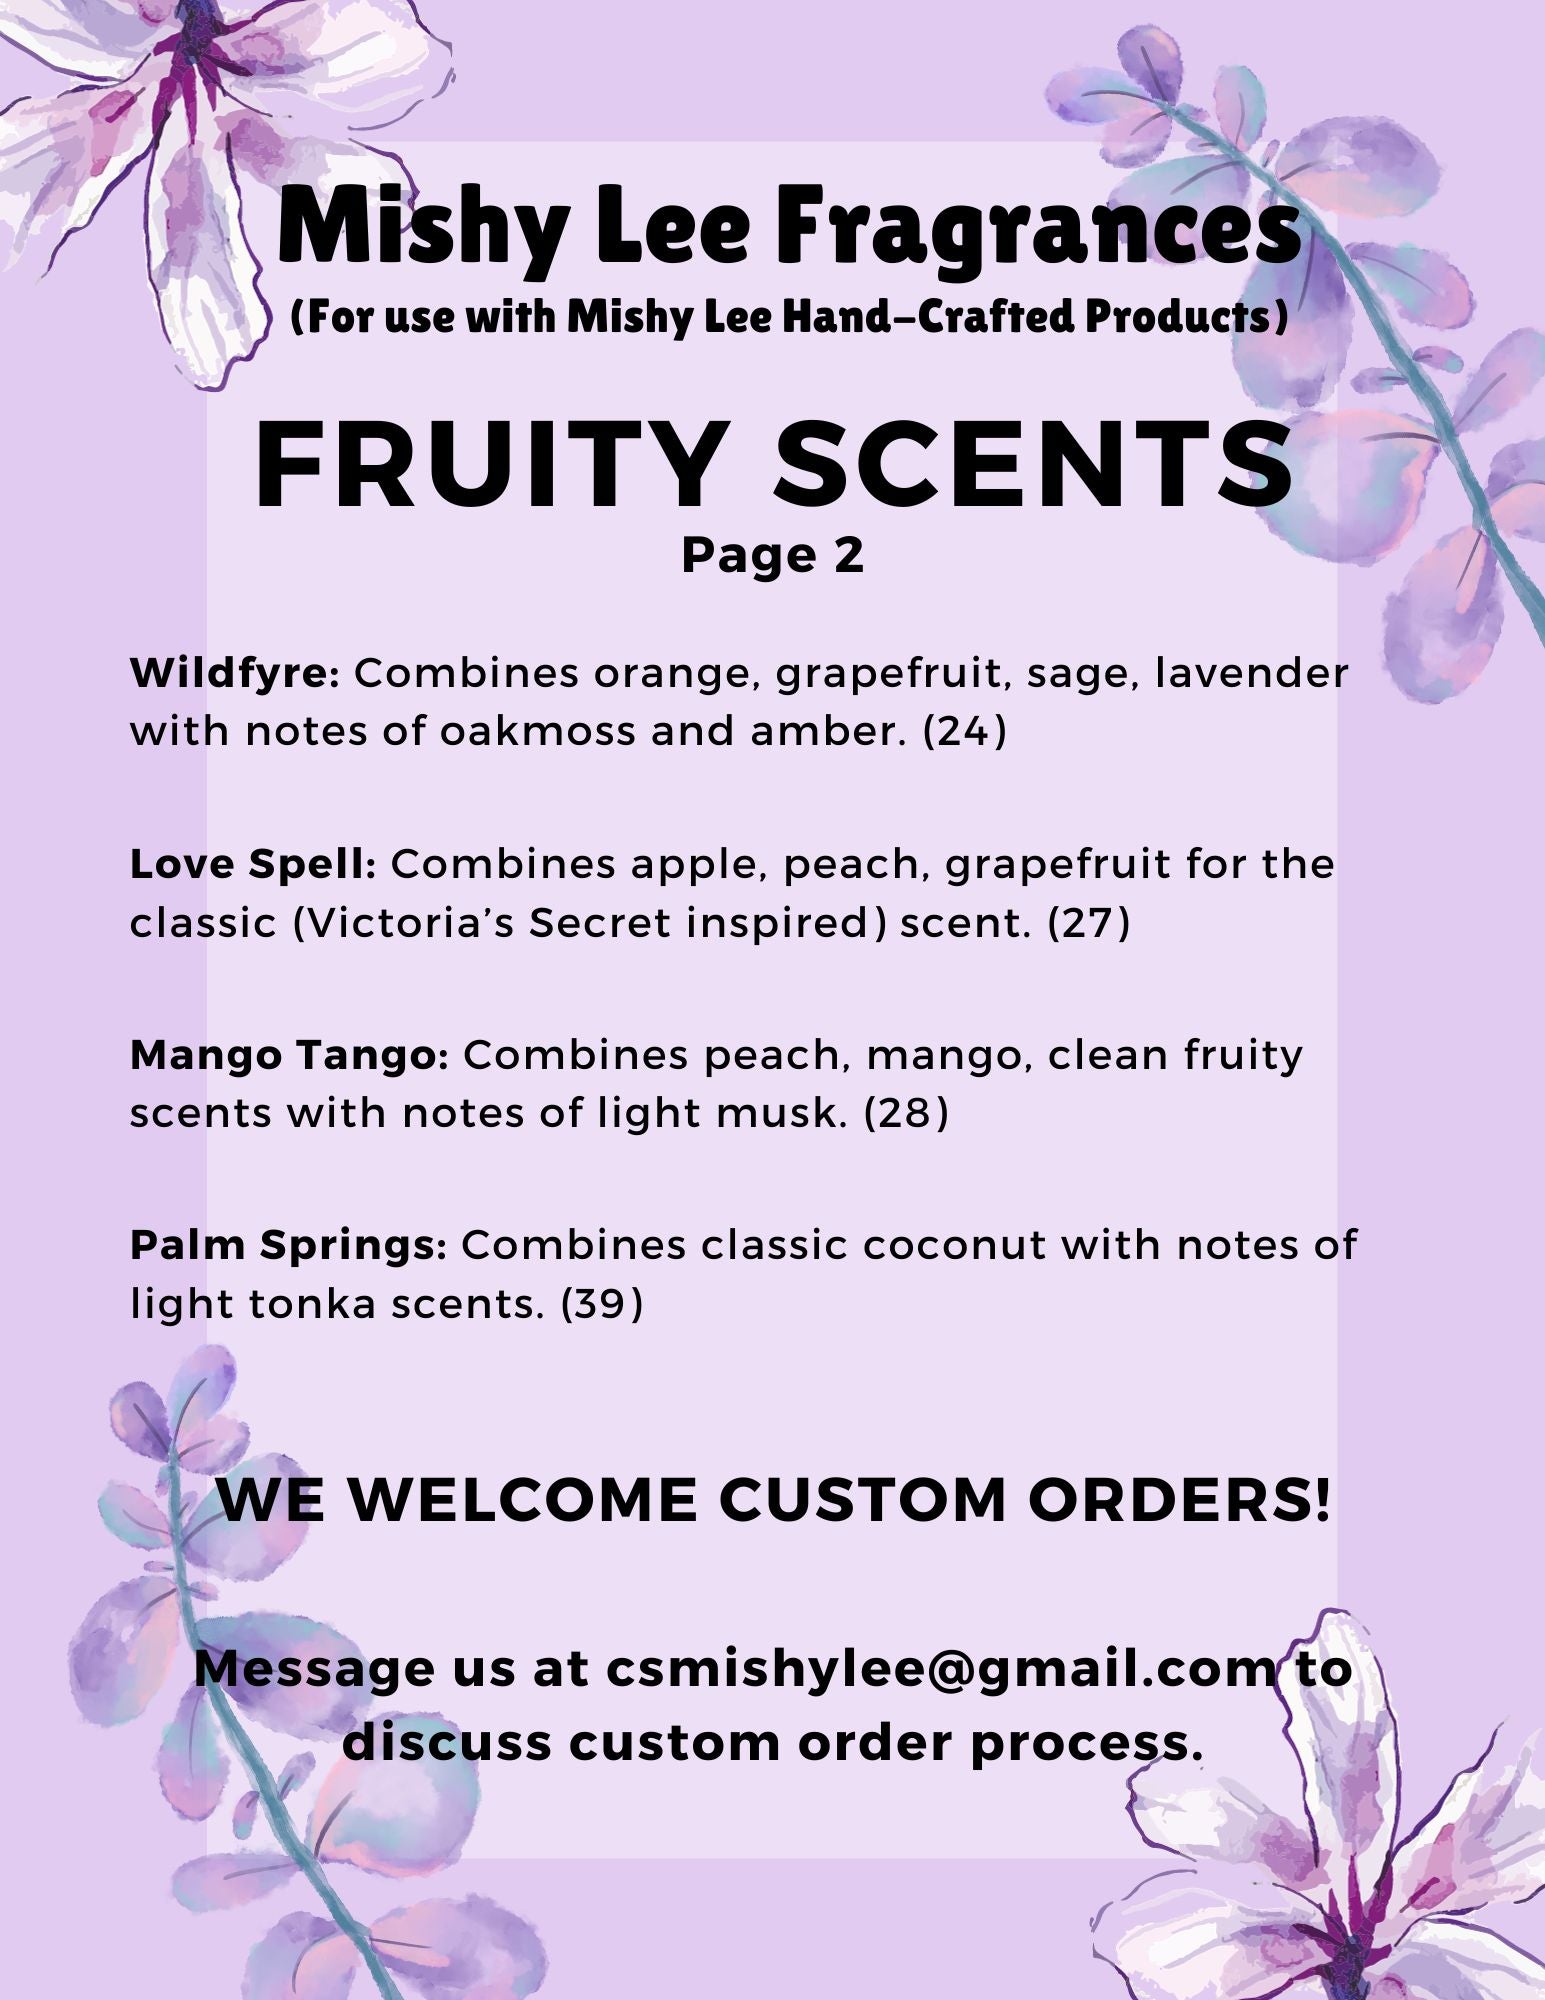 Large Flowers Scented Wax Melts